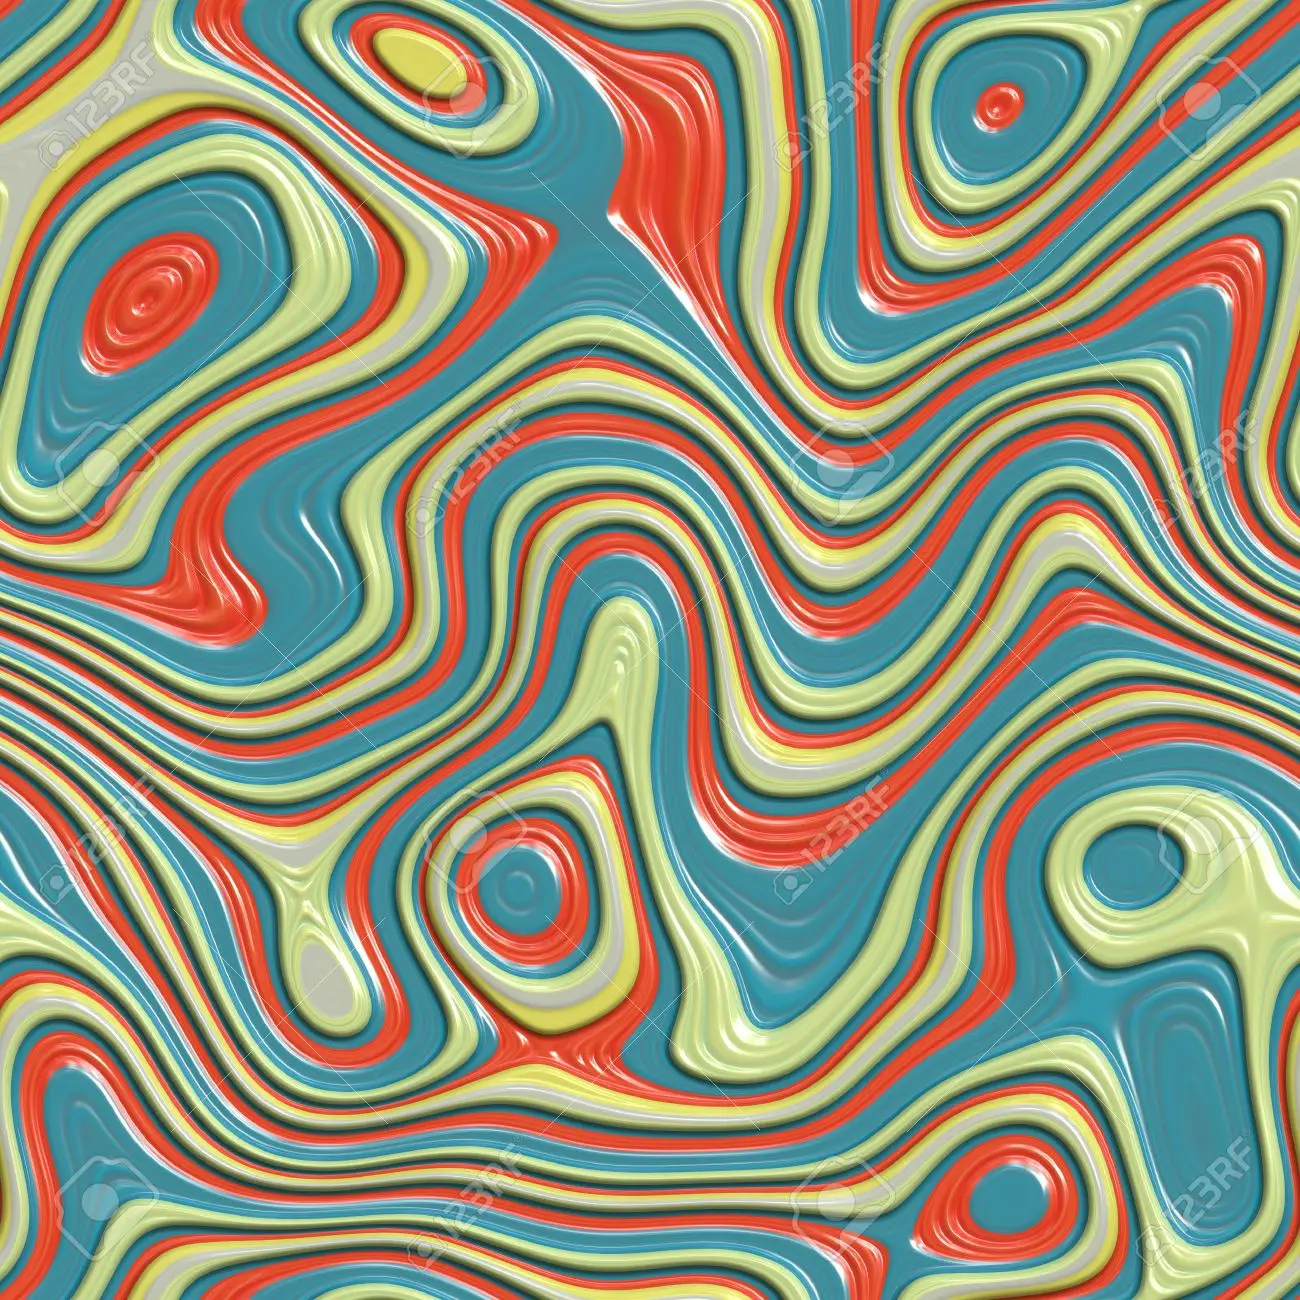 Red yellow and blue colorful swirls wallpaper background tiles seamlessly stock photo picture and royalty free image image